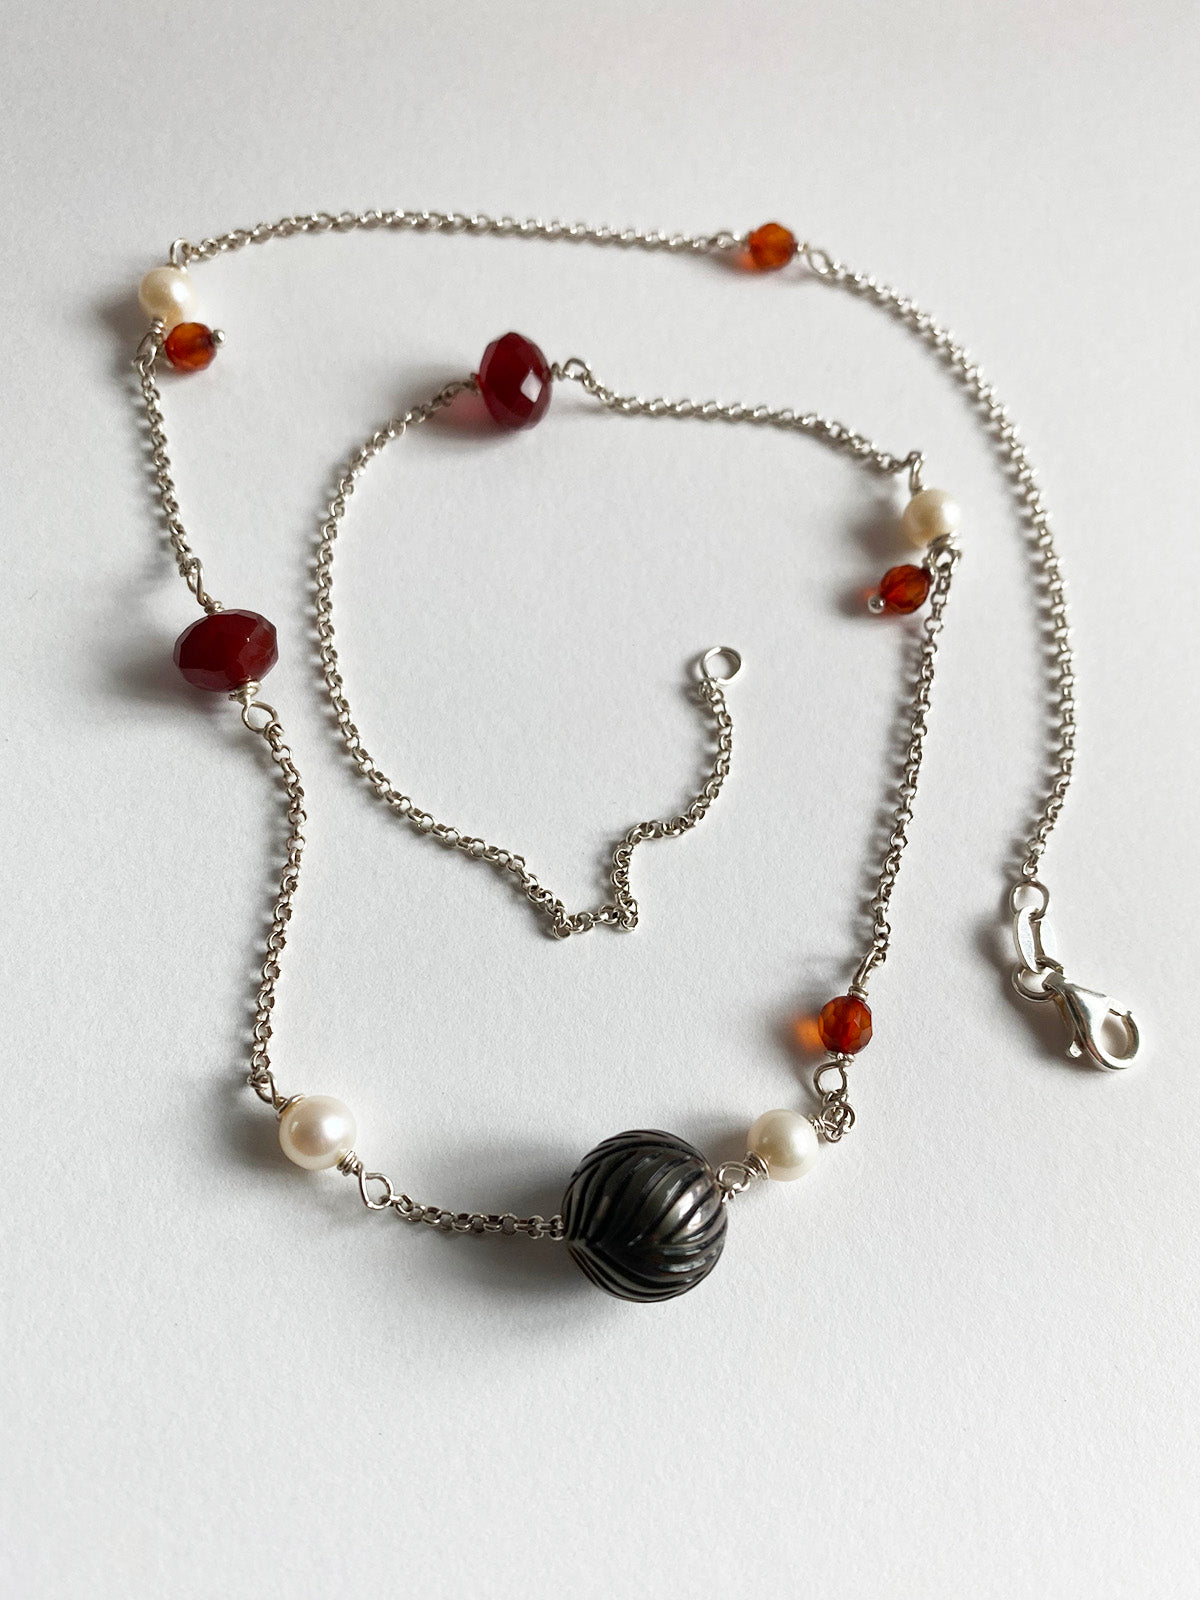 11mm Floating Carved Tahitian Pearl with White Pearls and Garnets by Linda Queally